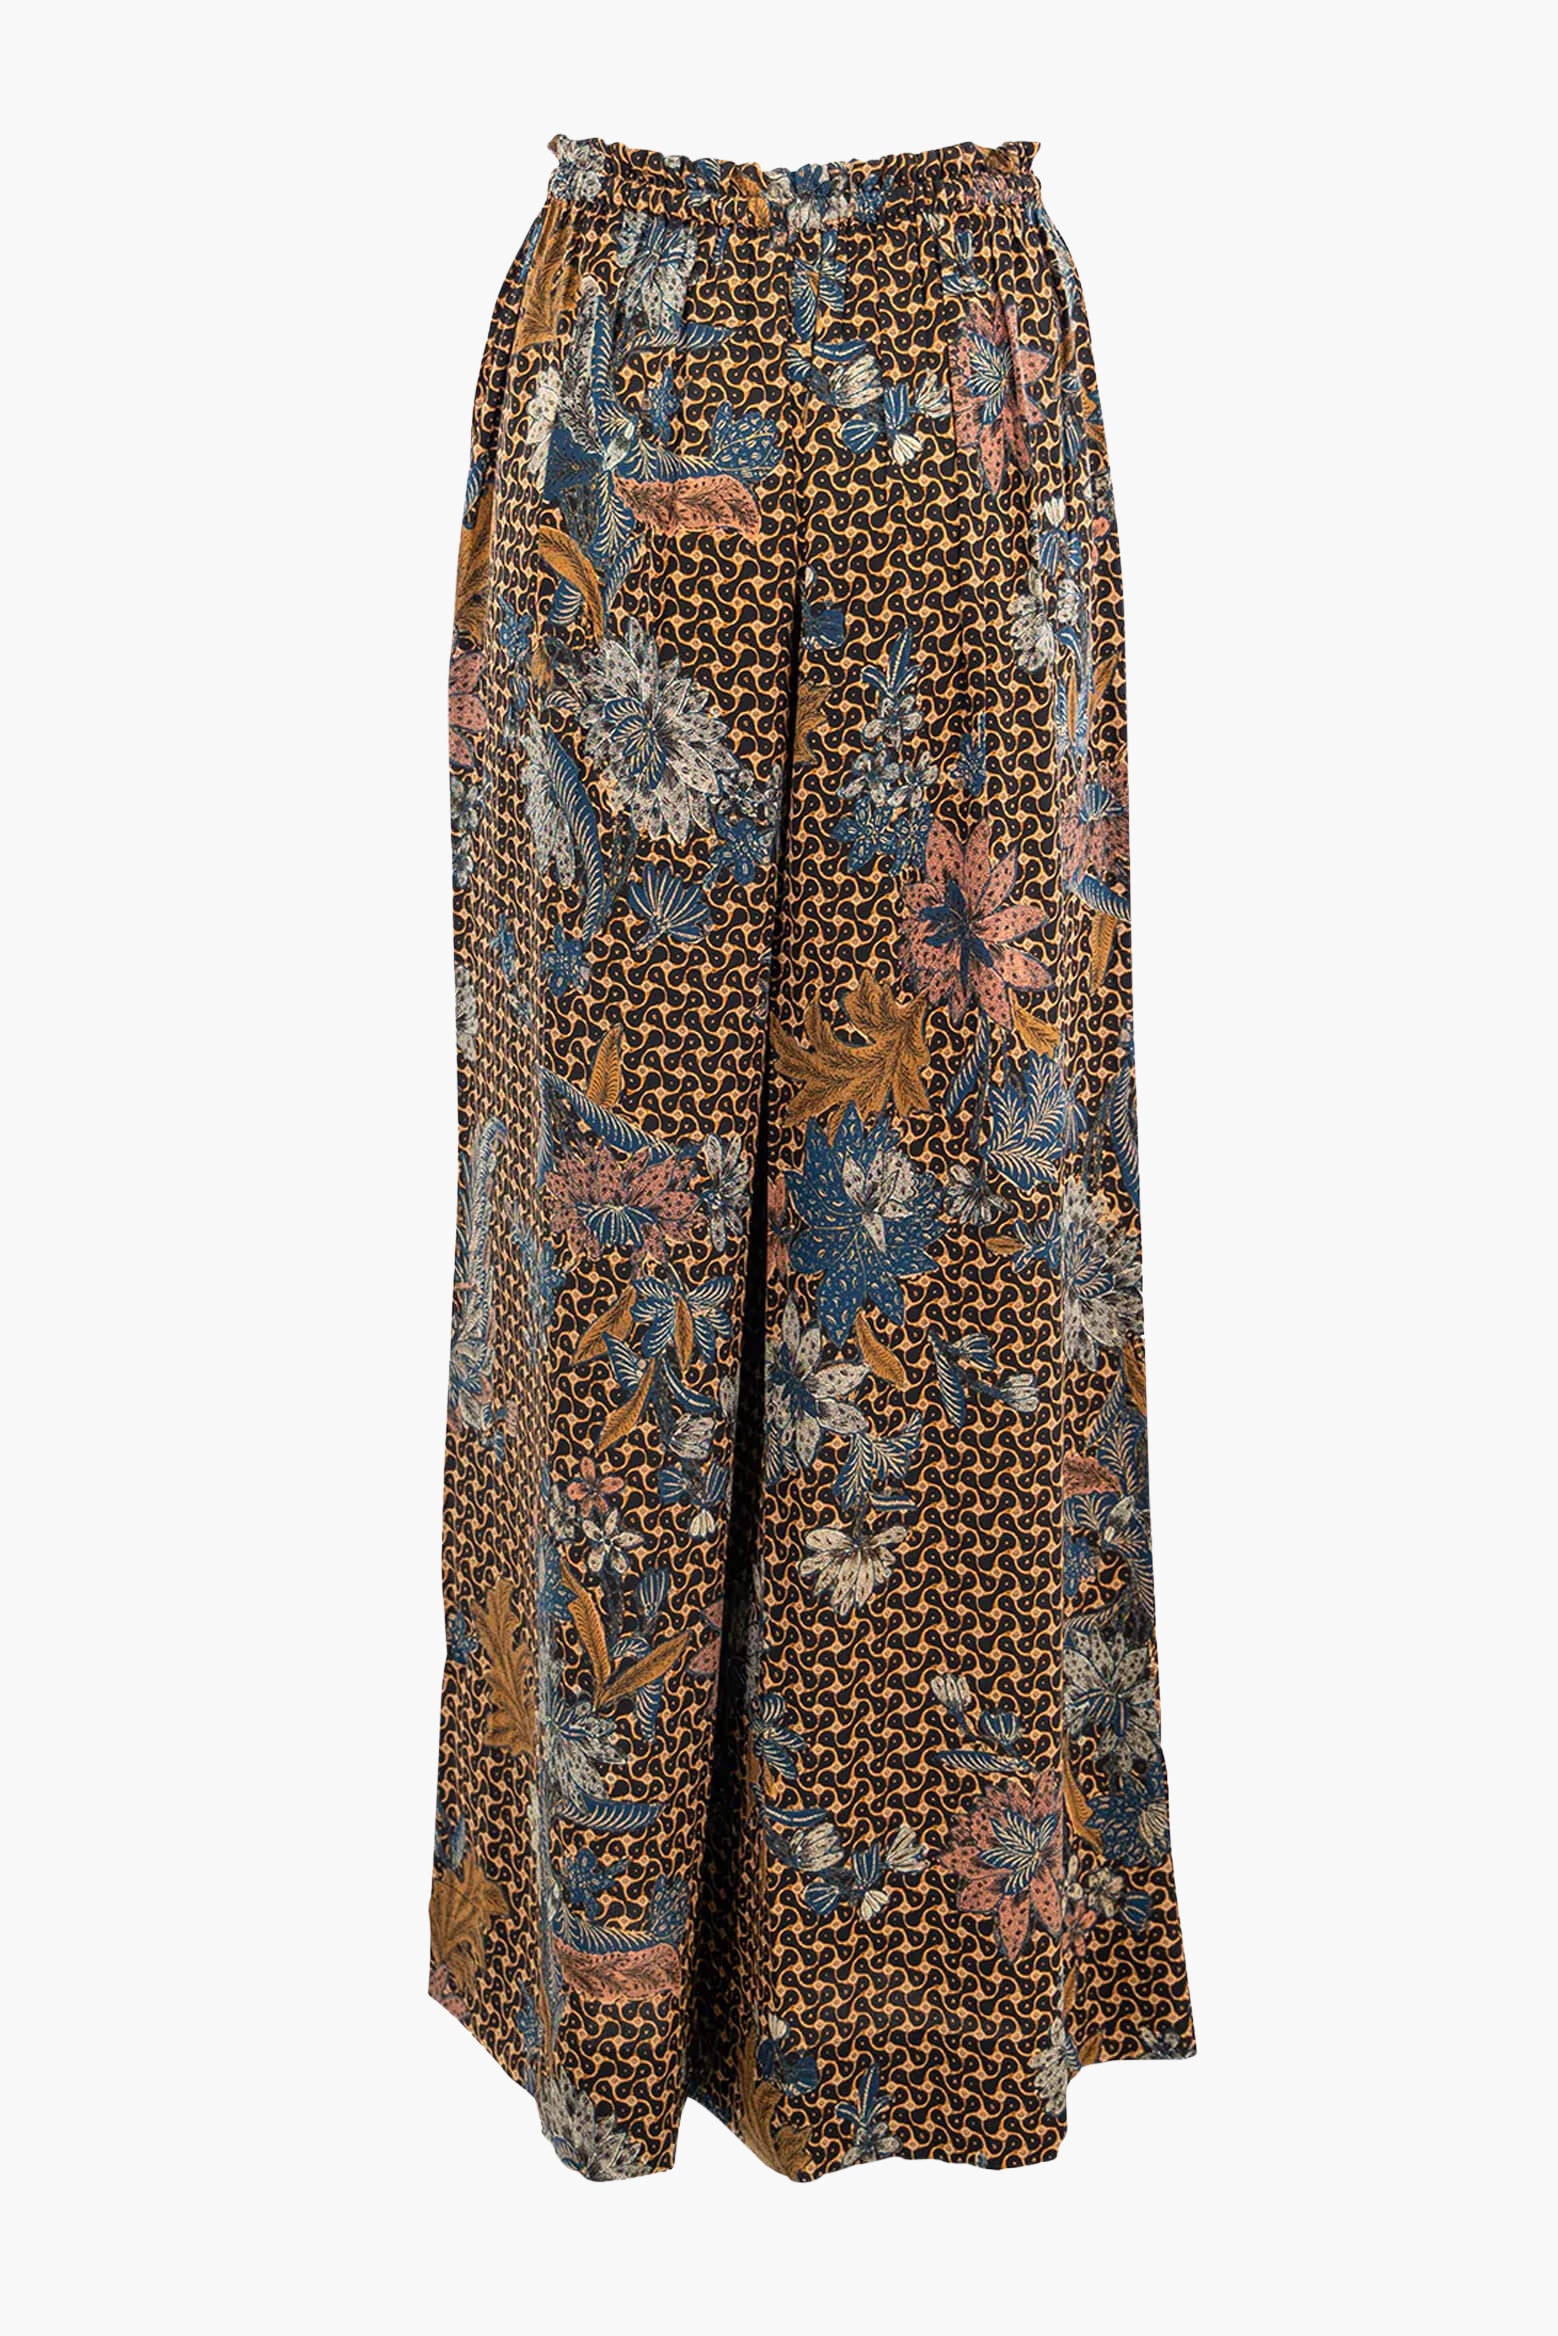 Ulla Johnson Sawyer Pant in Gerbera available at The New Trend